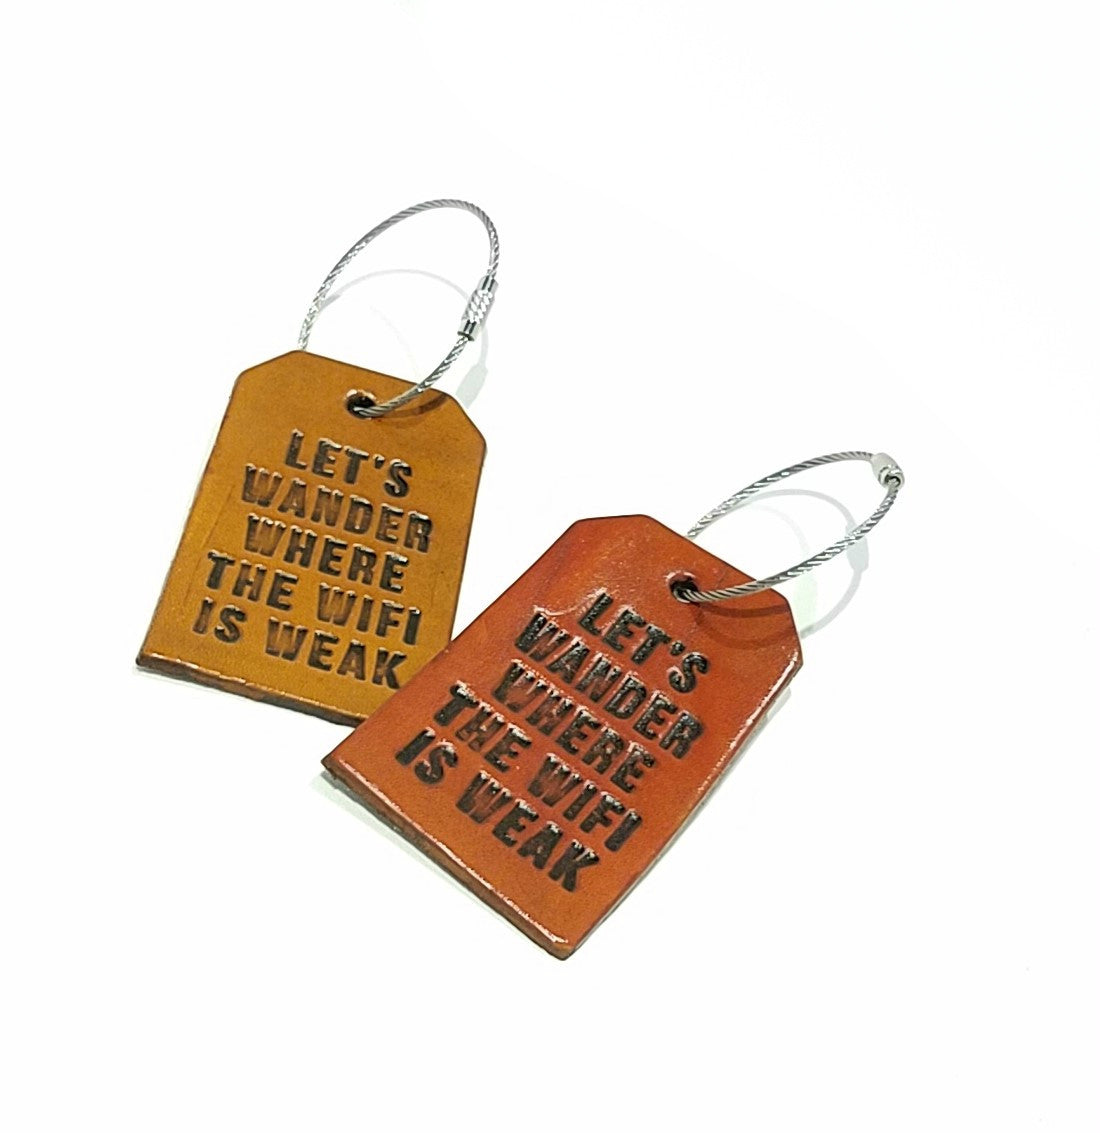 Luggage Tag - Let's Wander Where the Wifi is Weak